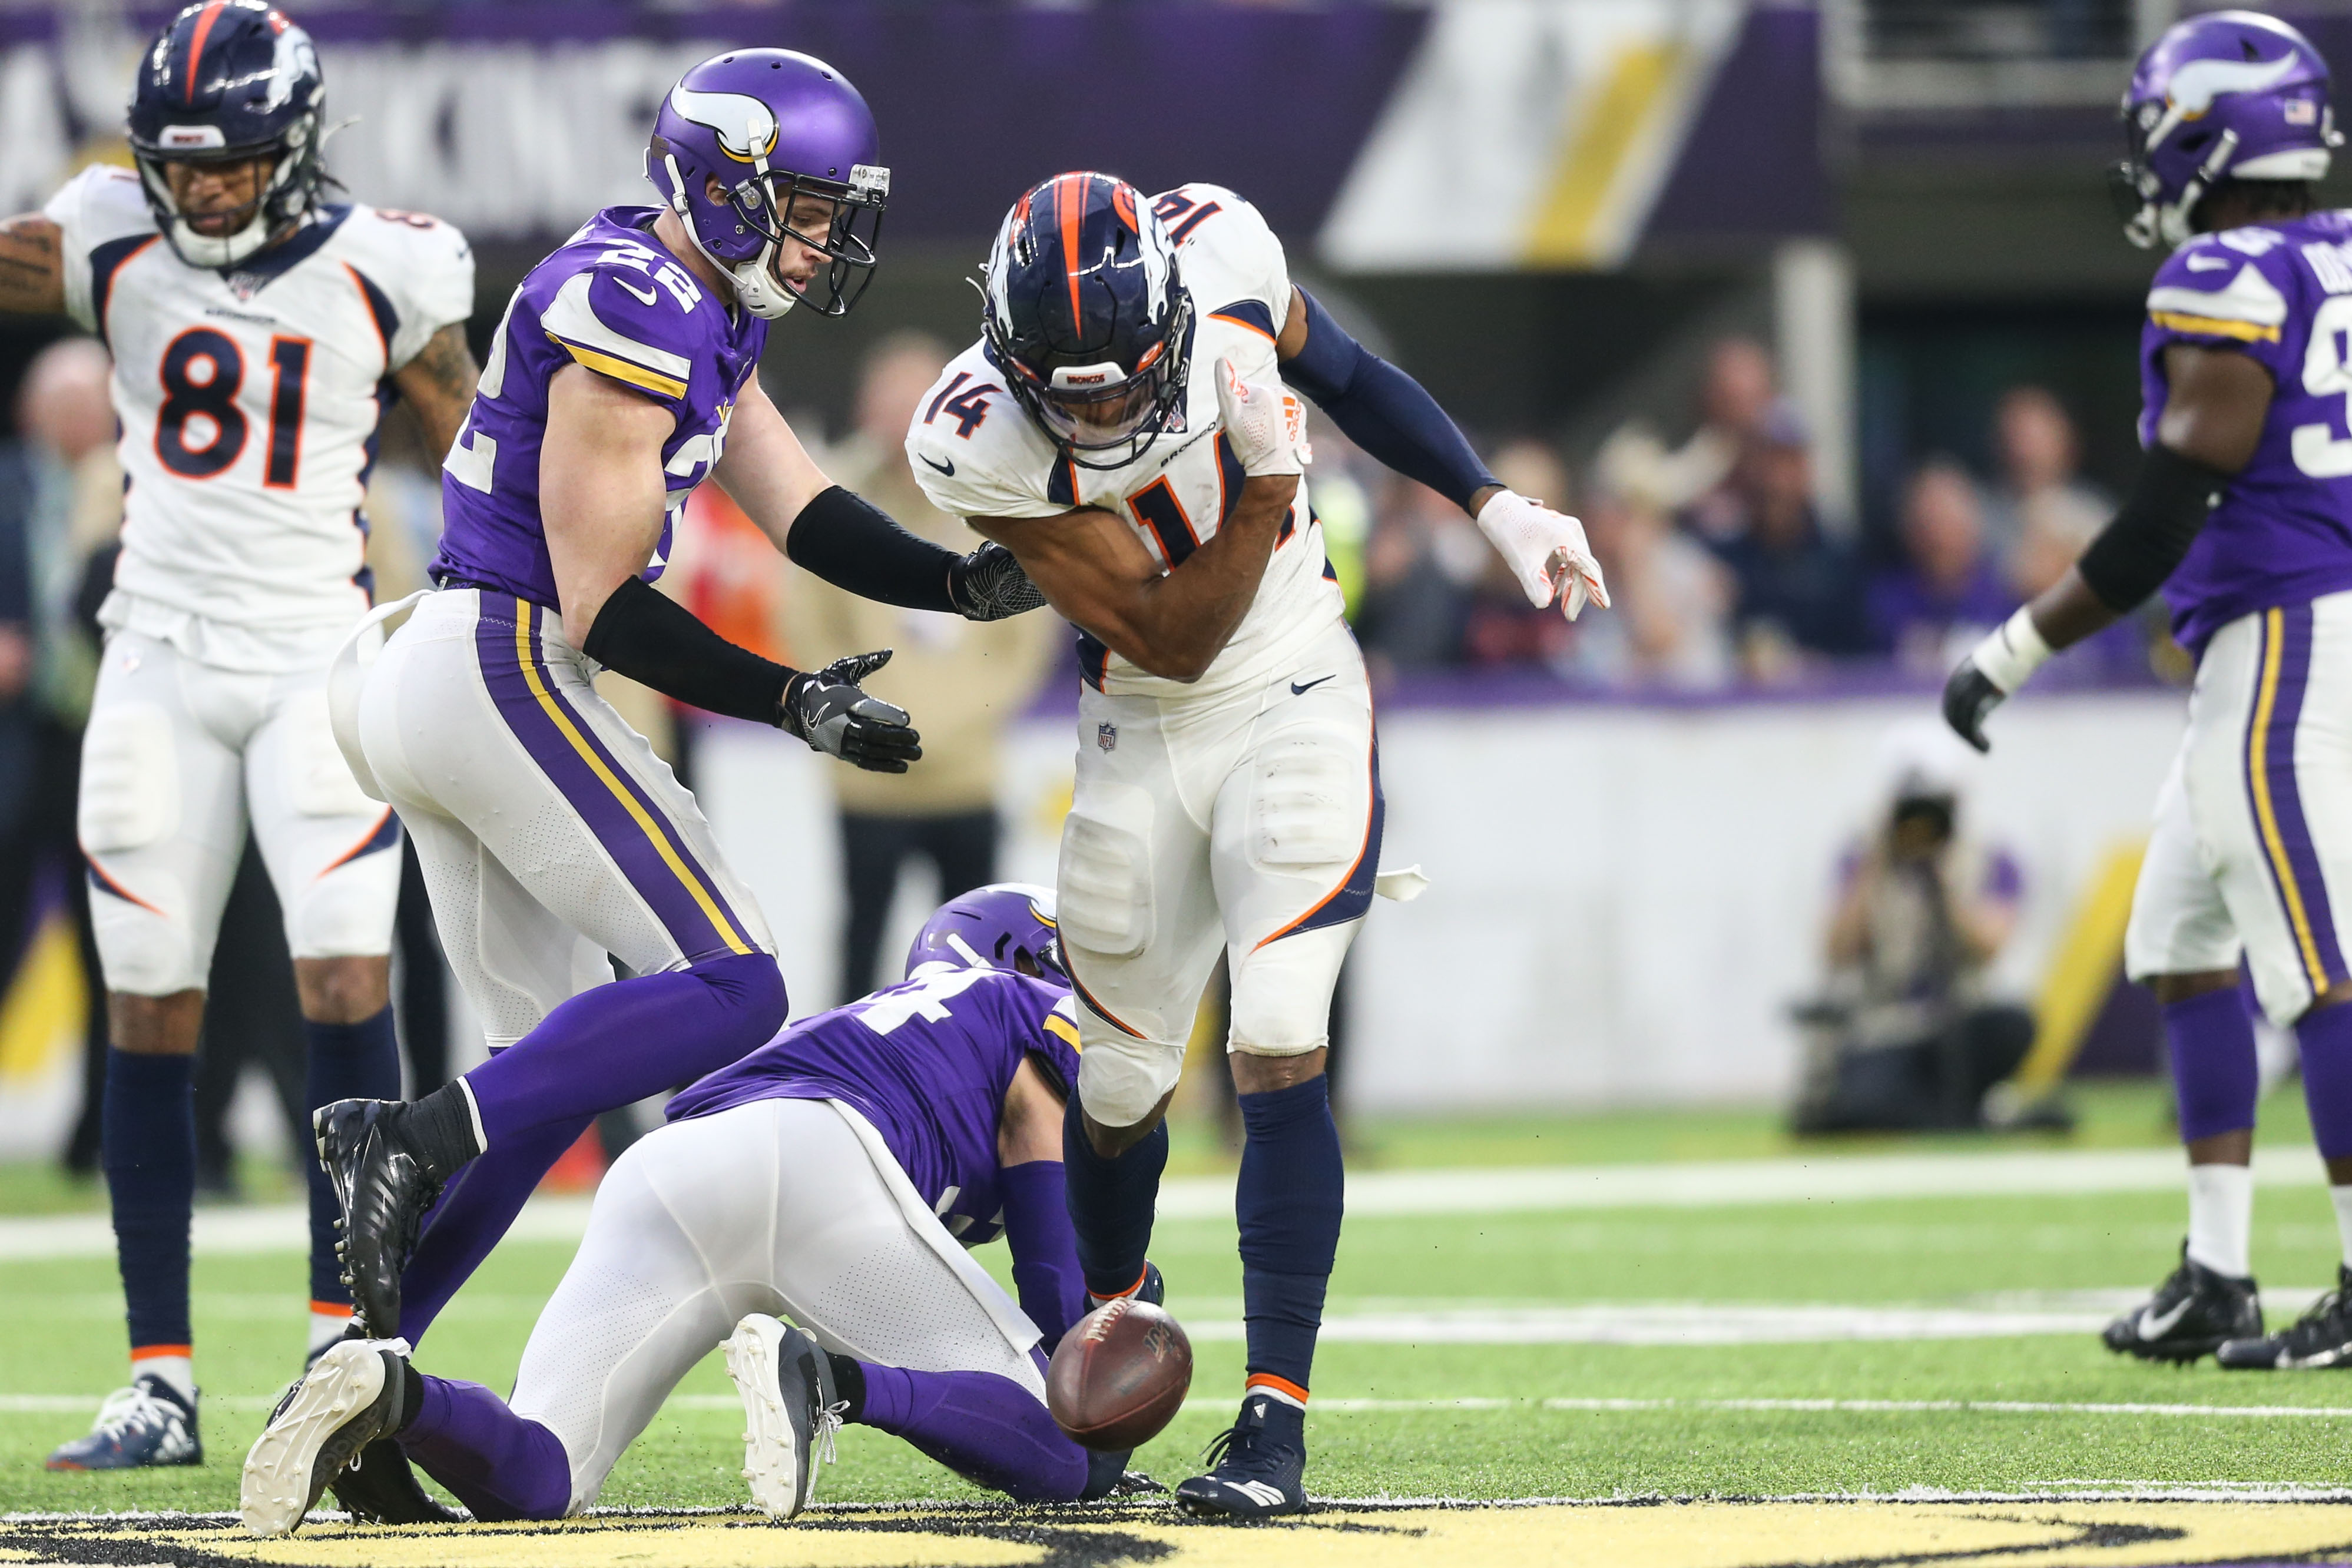 Denver Broncos wide receiver Courtland Sutton (14) celebrates after gaining a first down against the Minnesota Vikings during the third quarter at U.S. Bank Stadium